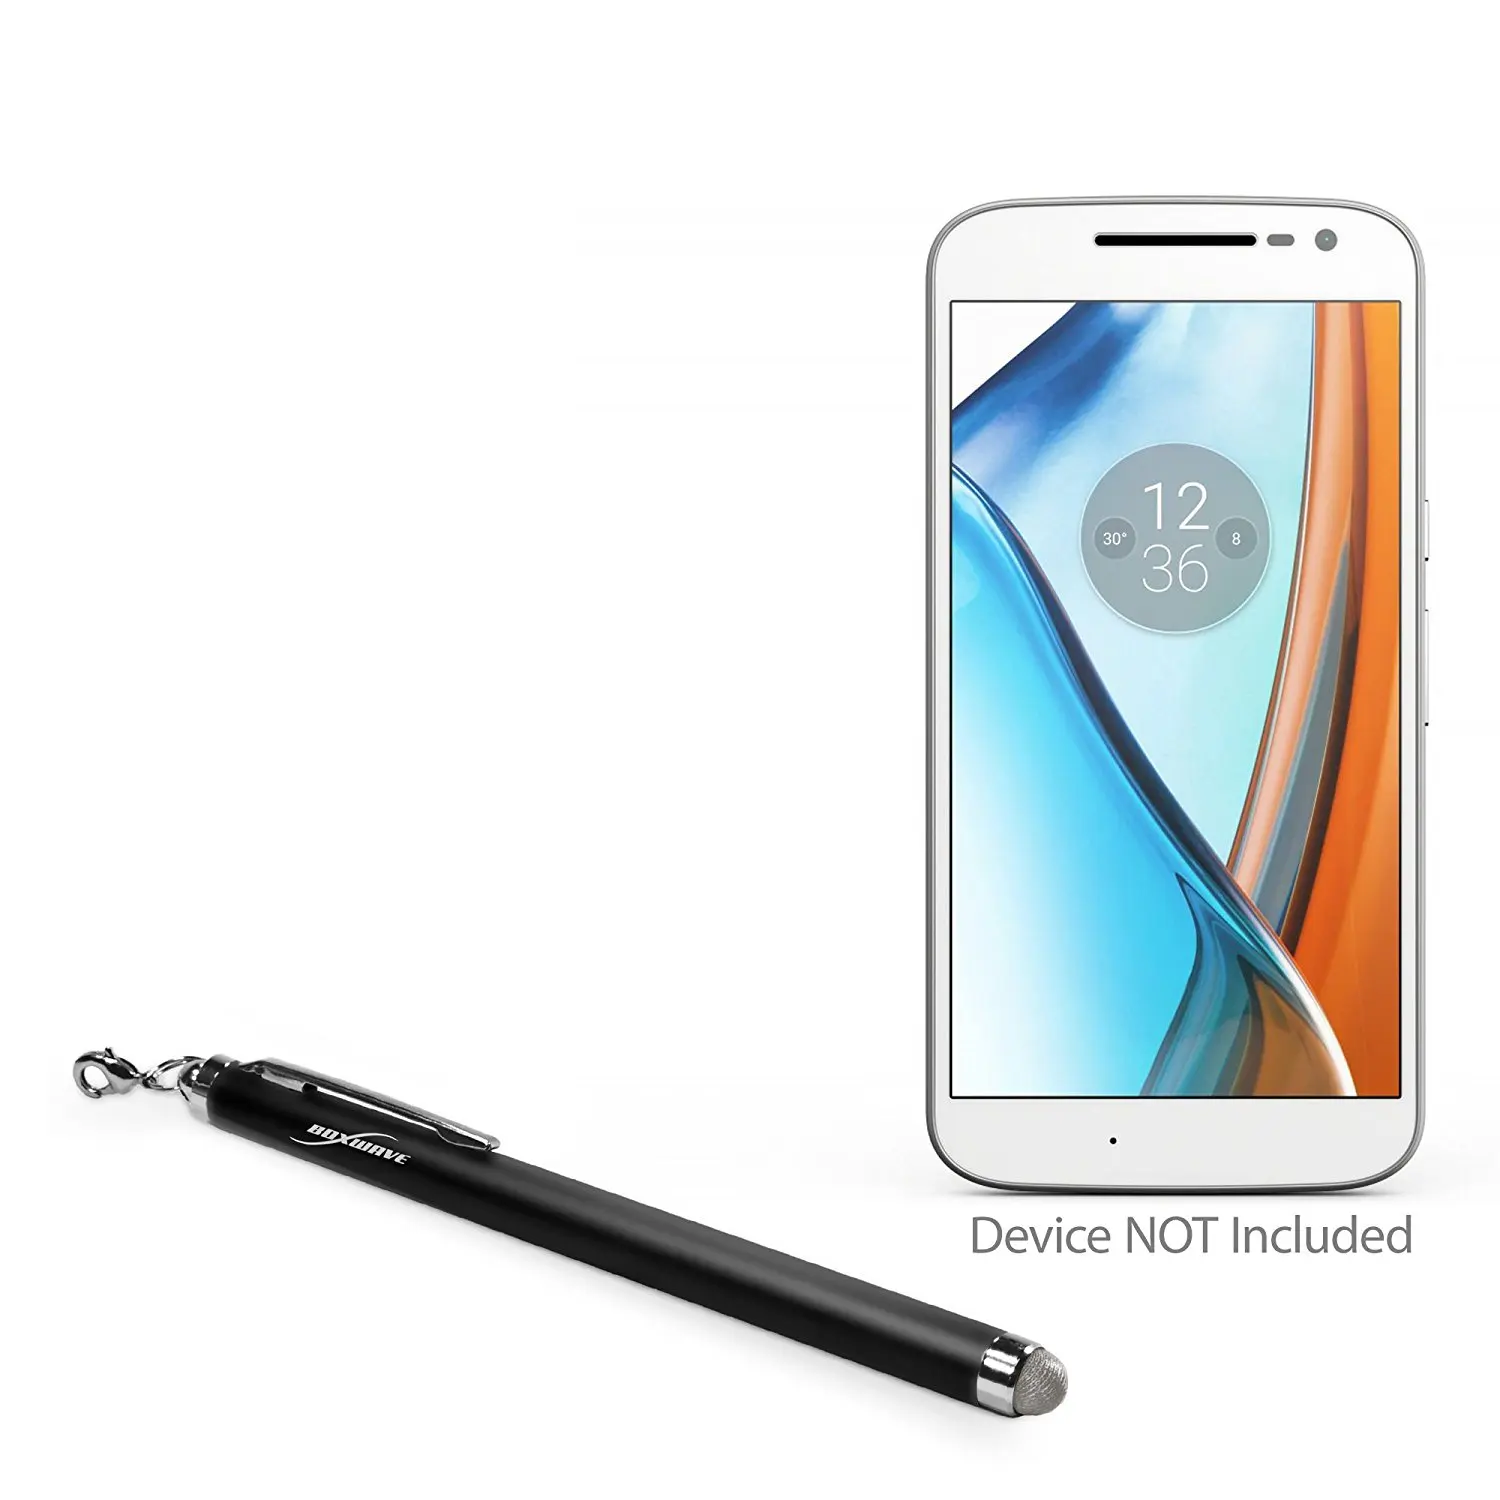 Cheap Stylus For Moto G, find Stylus For Moto G deals on